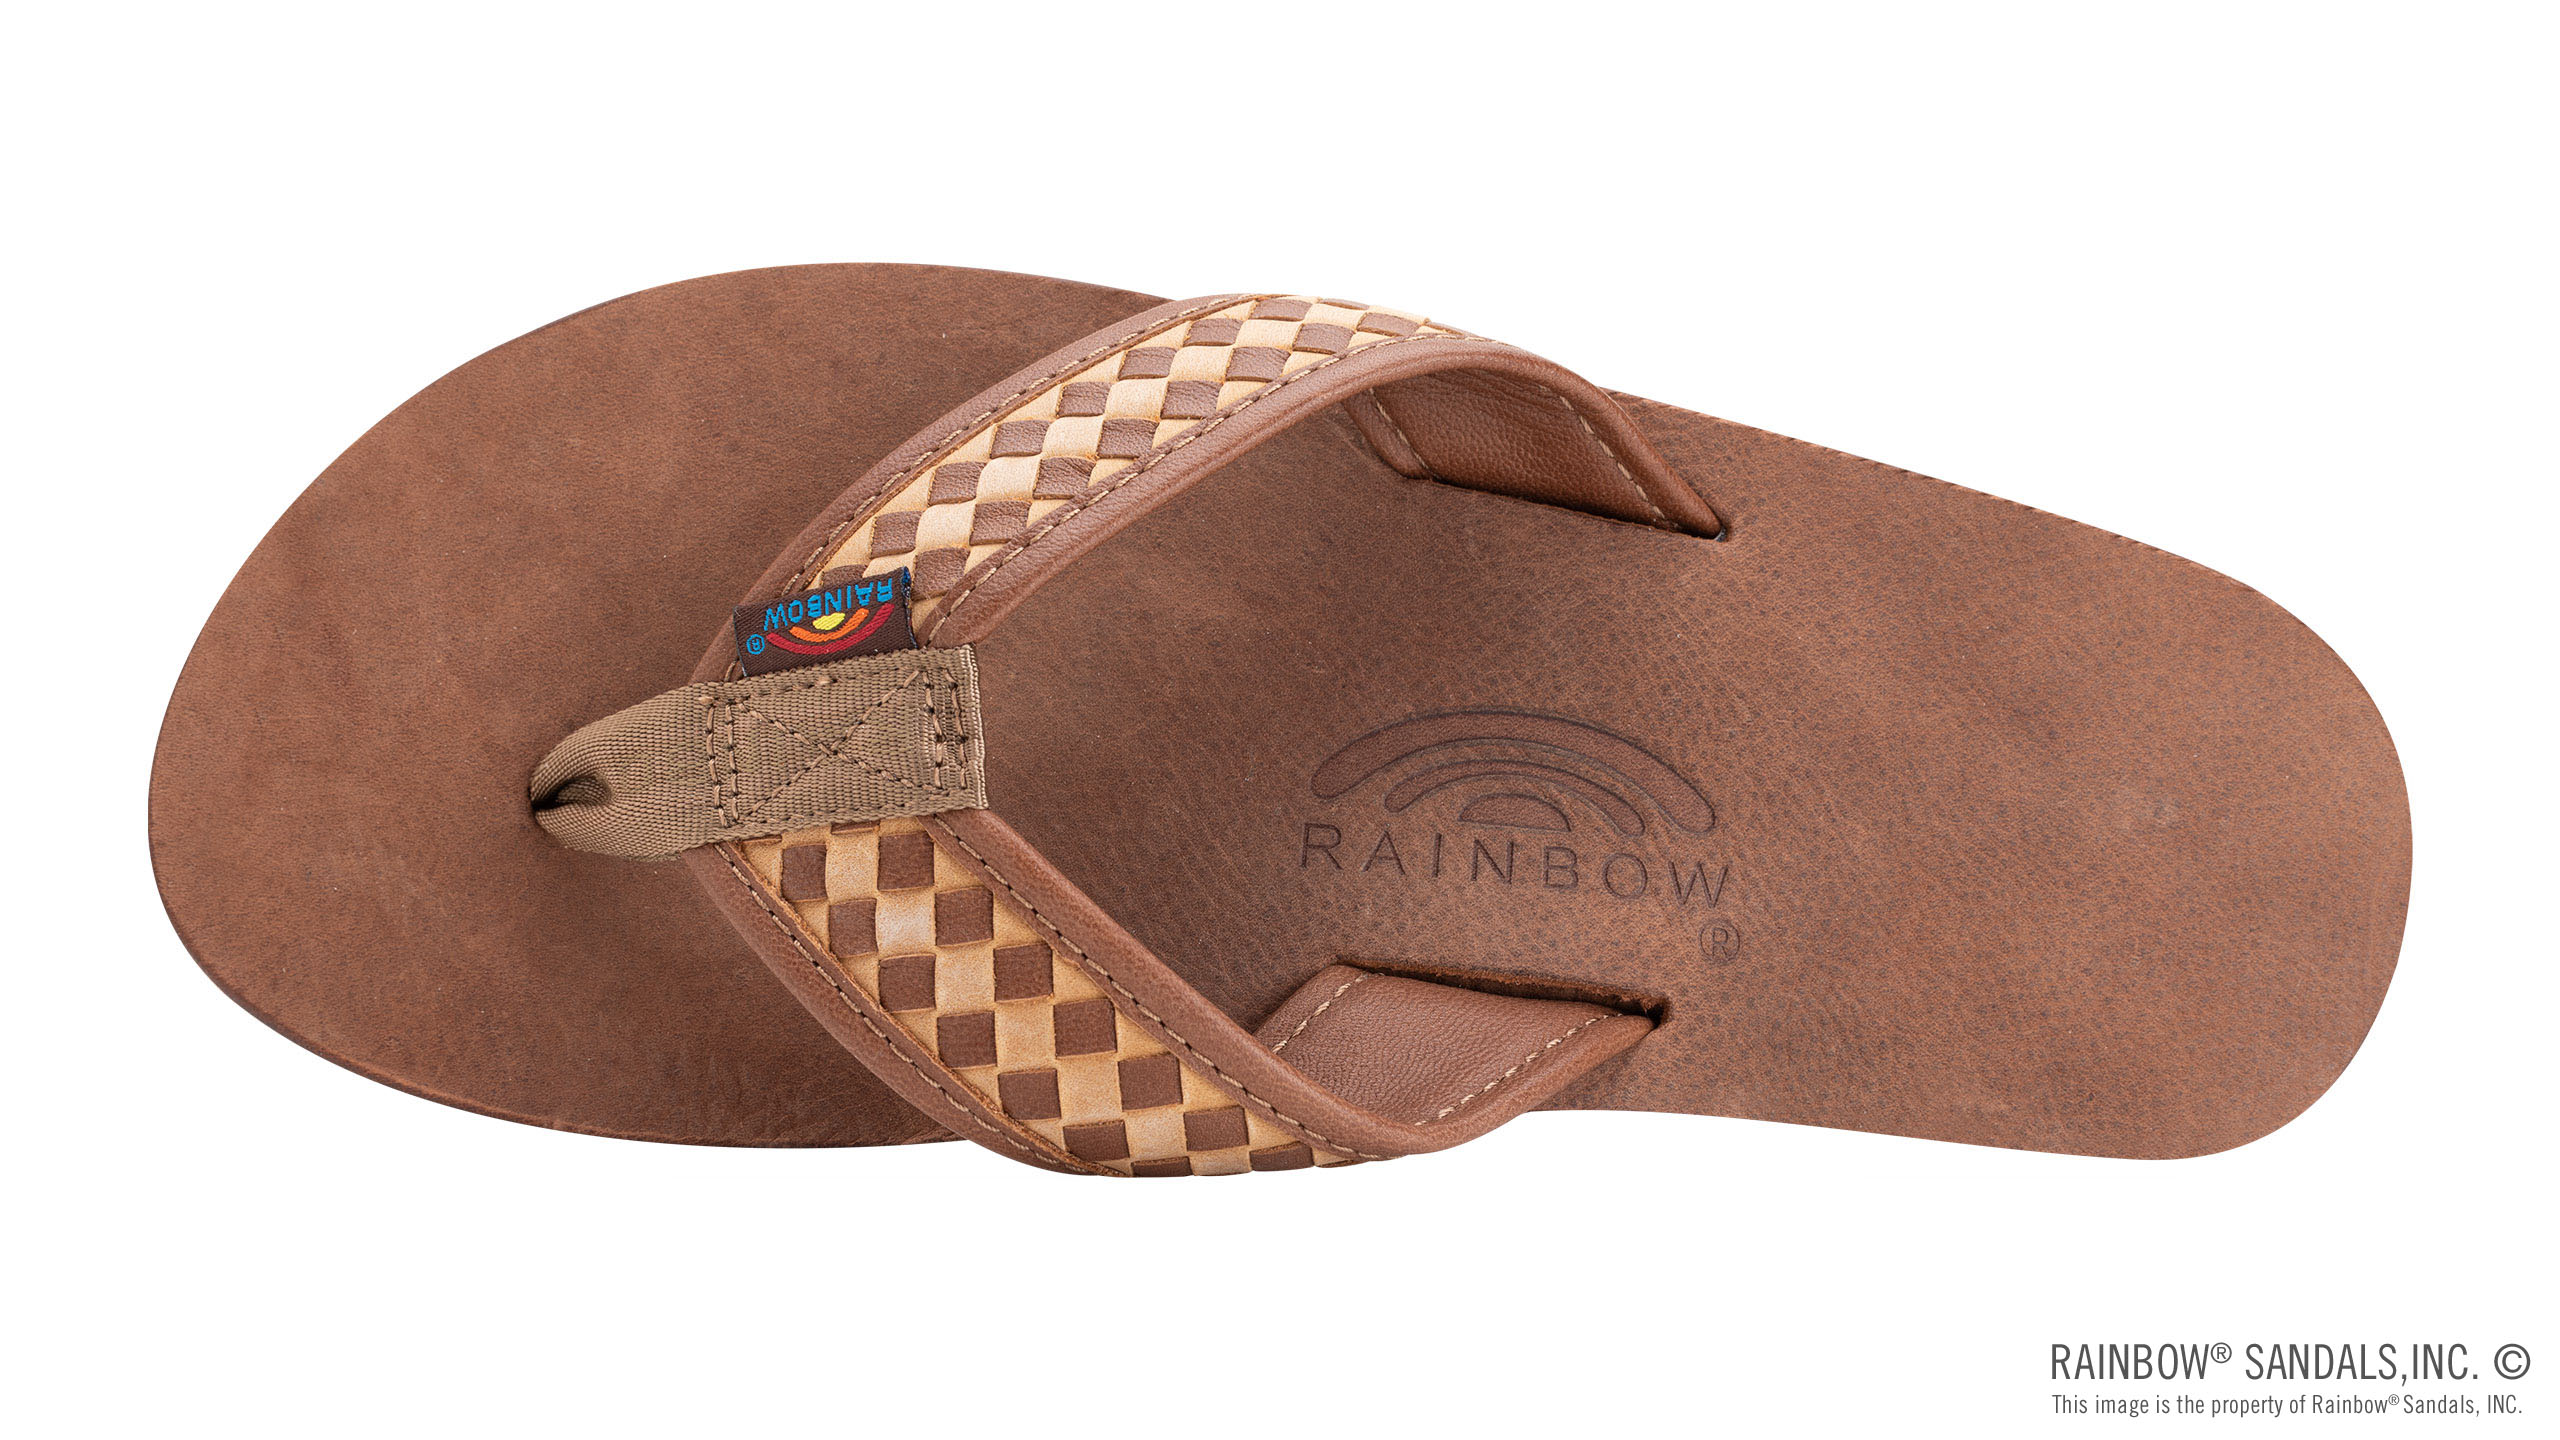  Rainbow Sandals Mens Luxury Leather - Single Layer Arch  Support, Buckskin, Mens size S / 7.5-8.5